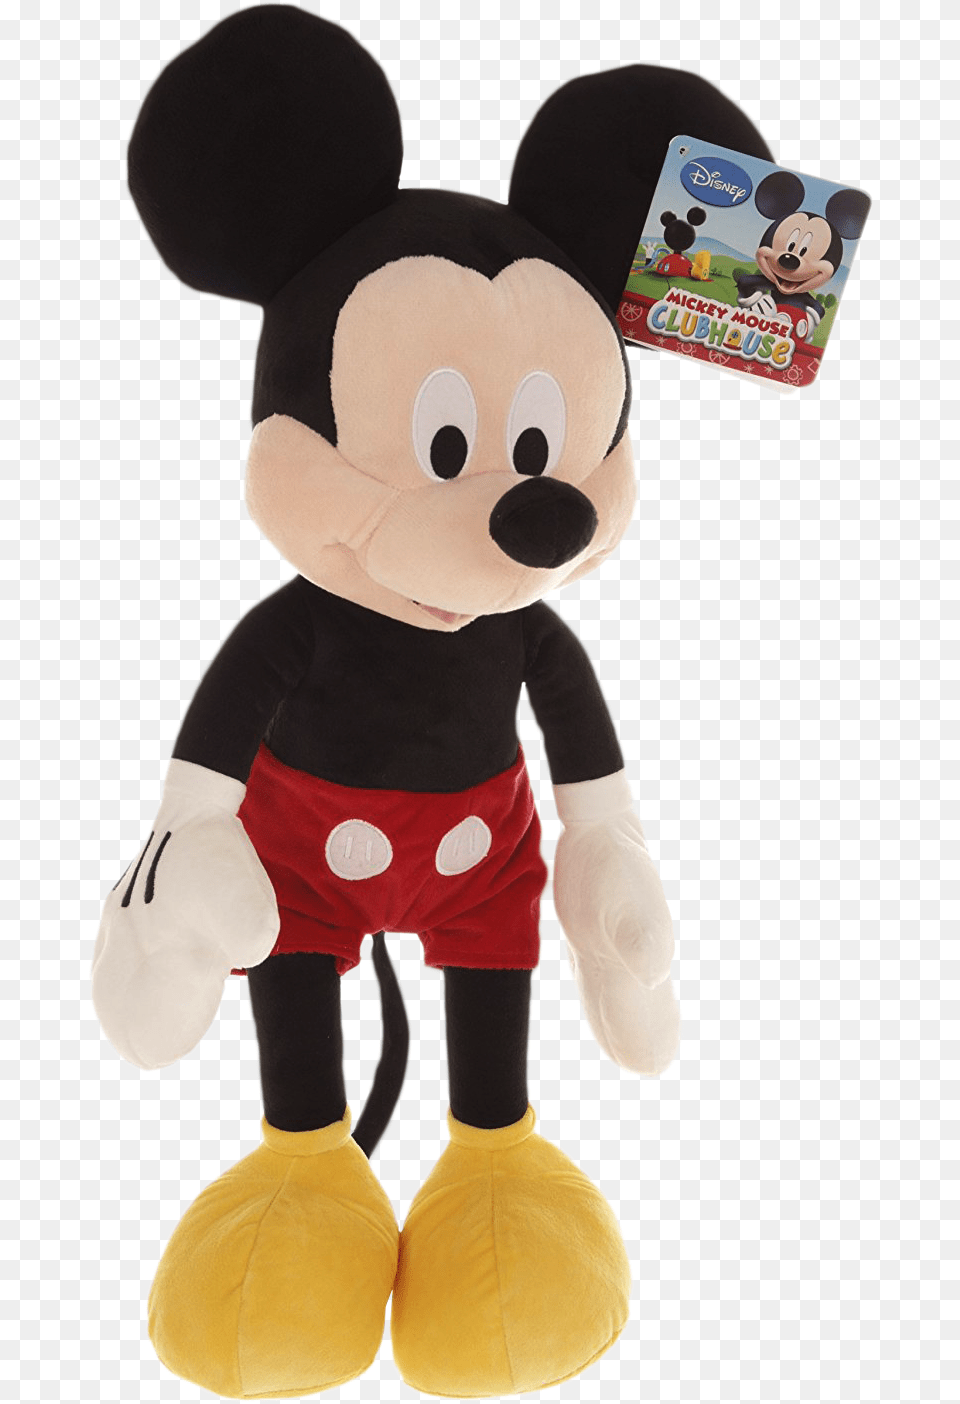 Frankenstein Mickey Head Frankenstein Mickey Head Mickey Mouse Stuffed Toys Hong Kong Price, Toy, Plush, Clothing, Shorts Free Png